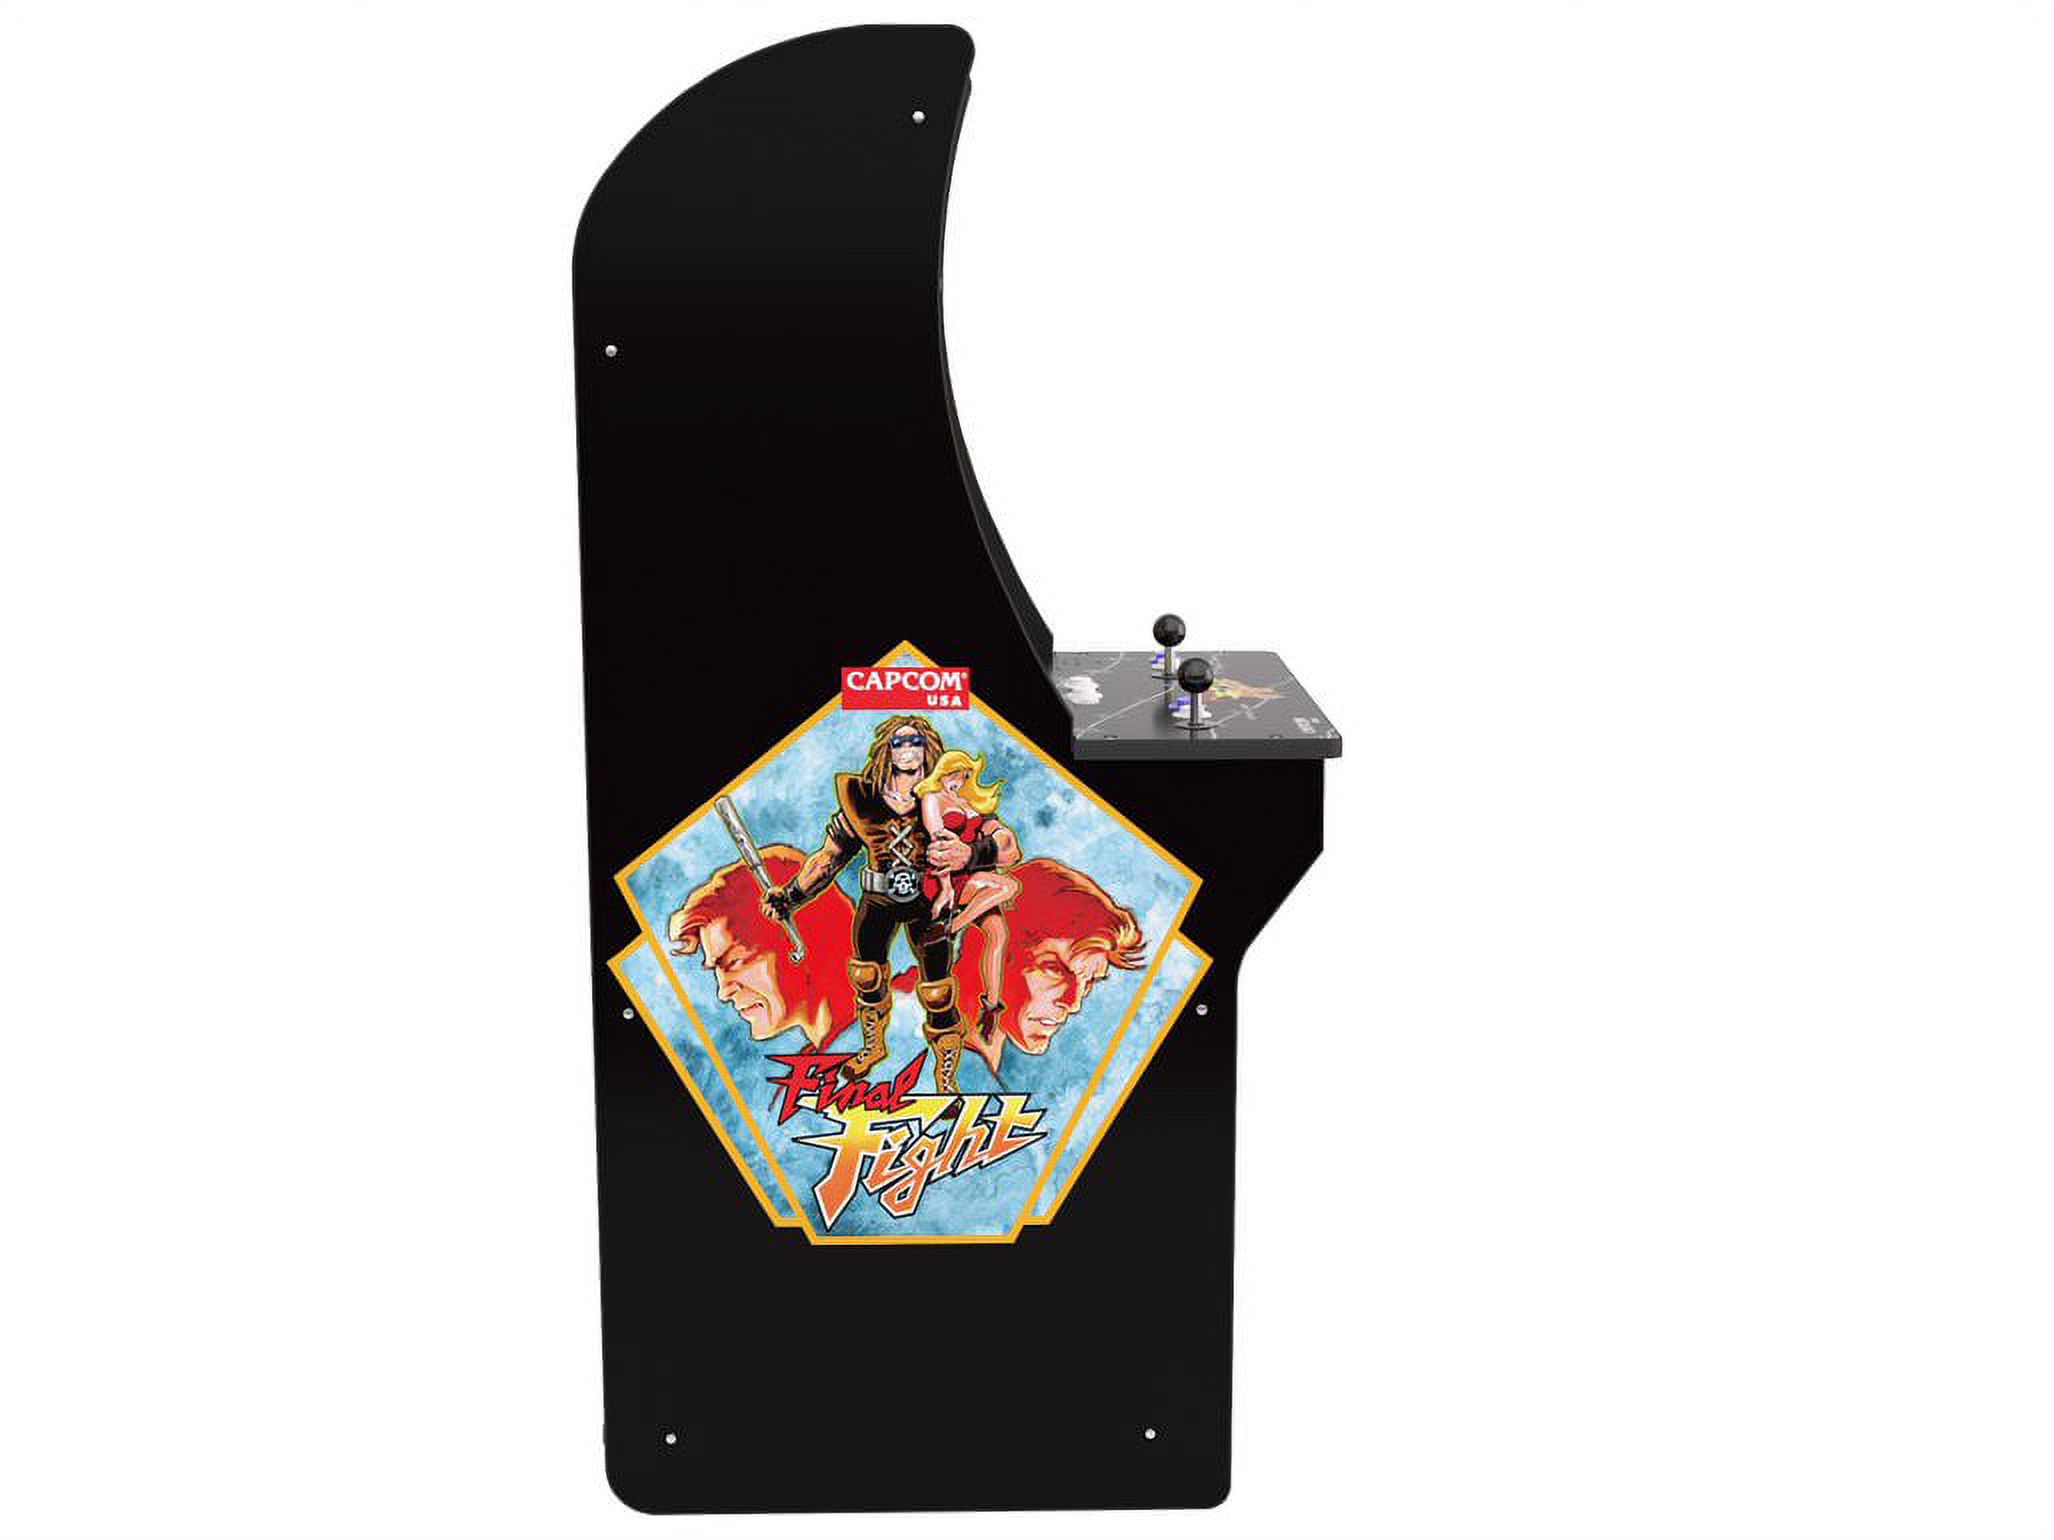 Arcade1Up, Final Fight Arcade Machine without riser - image 4 of 5